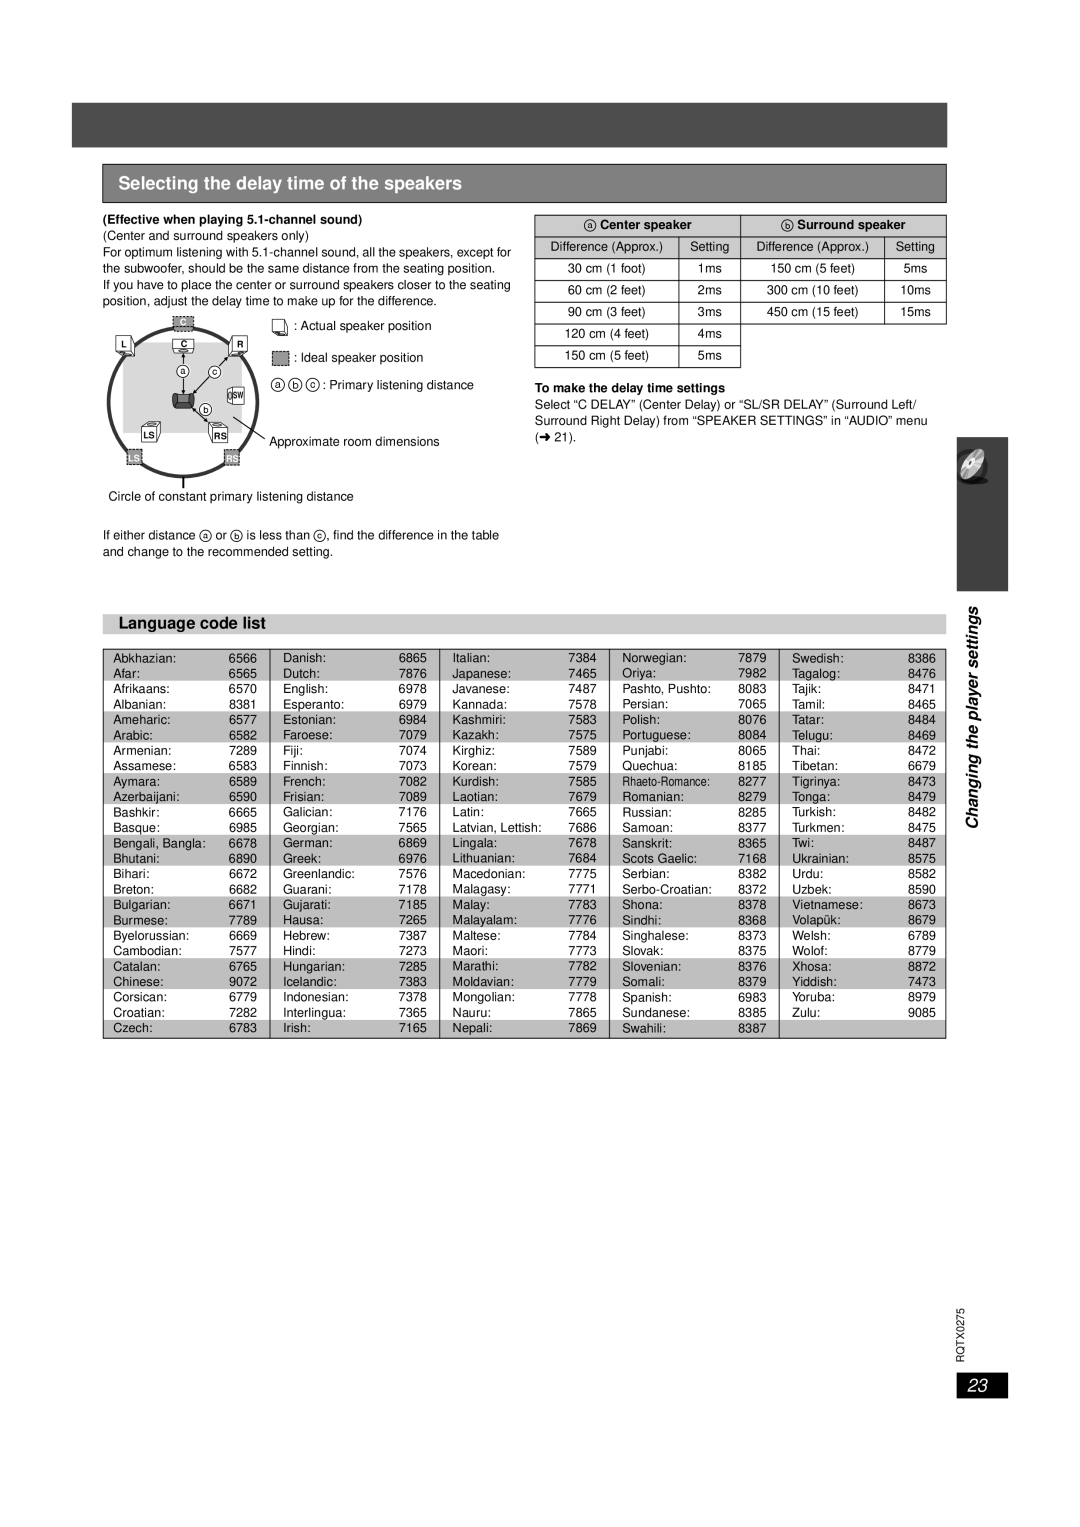 Panasonic SC-PT665 manual Selecting the delay time of the speakers, Language code list, Changing the player settings 